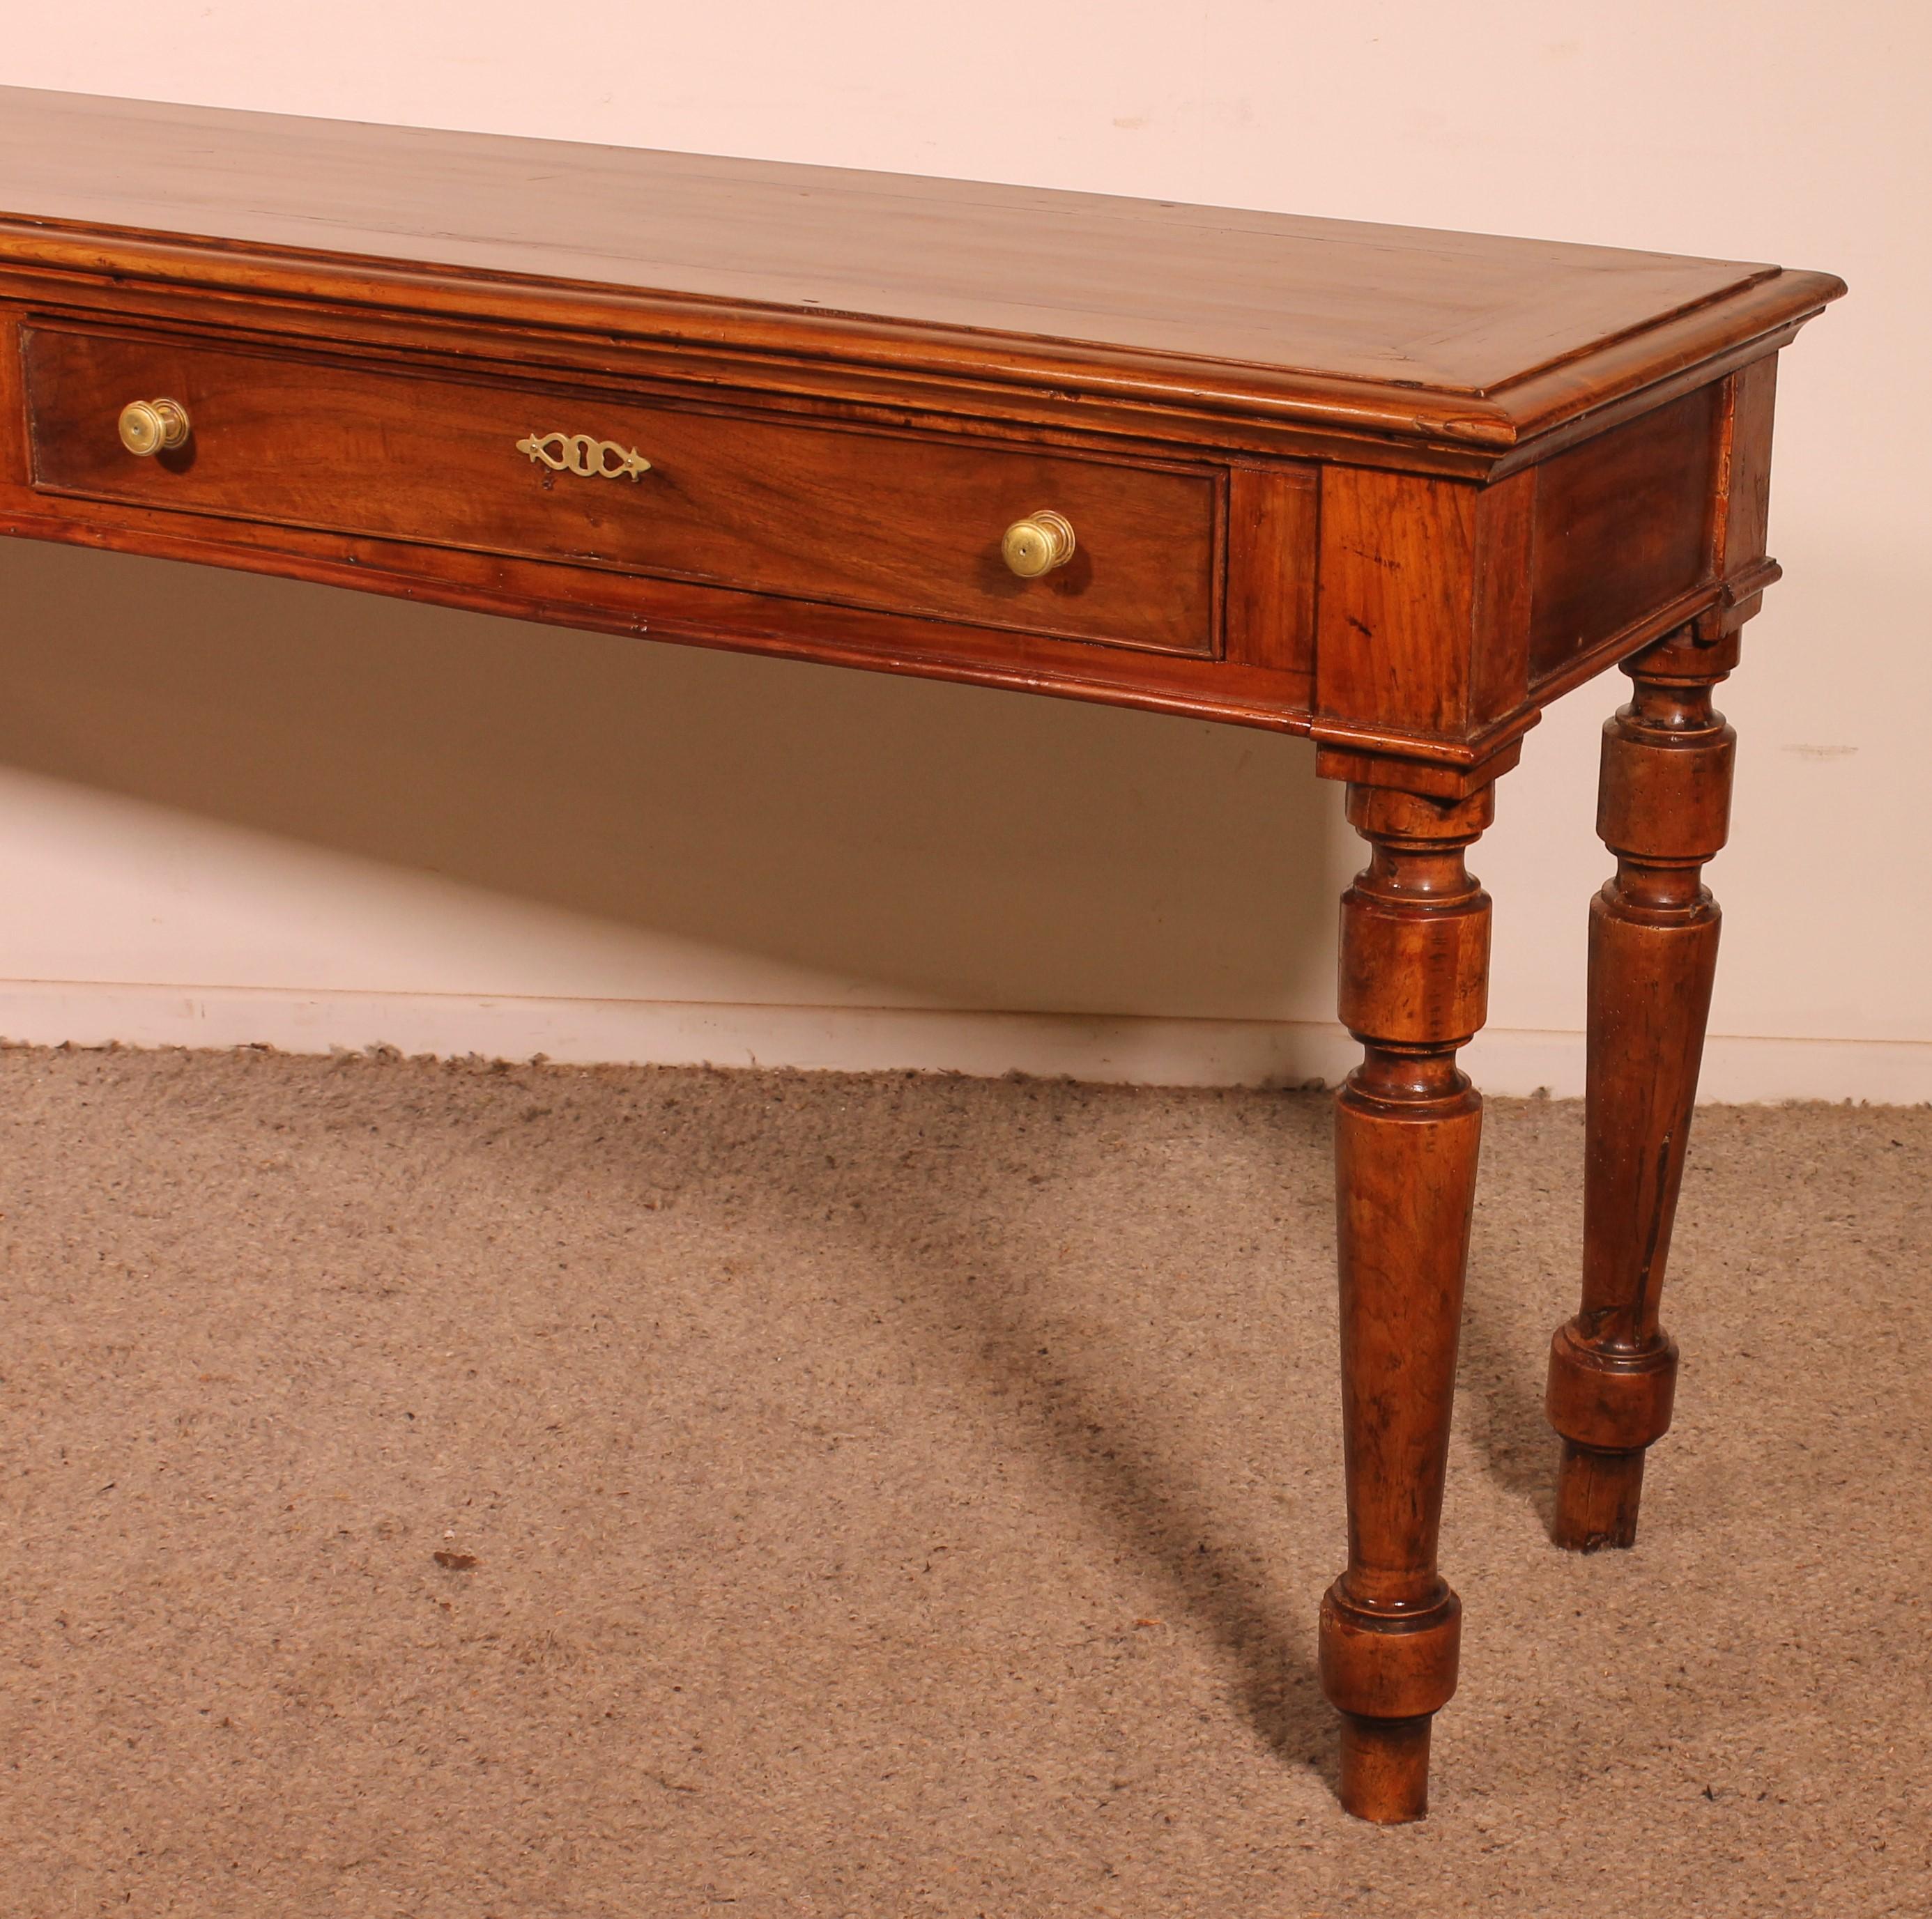 19th Century Console In Cherry Wood With Two Drawers -19° Century From France